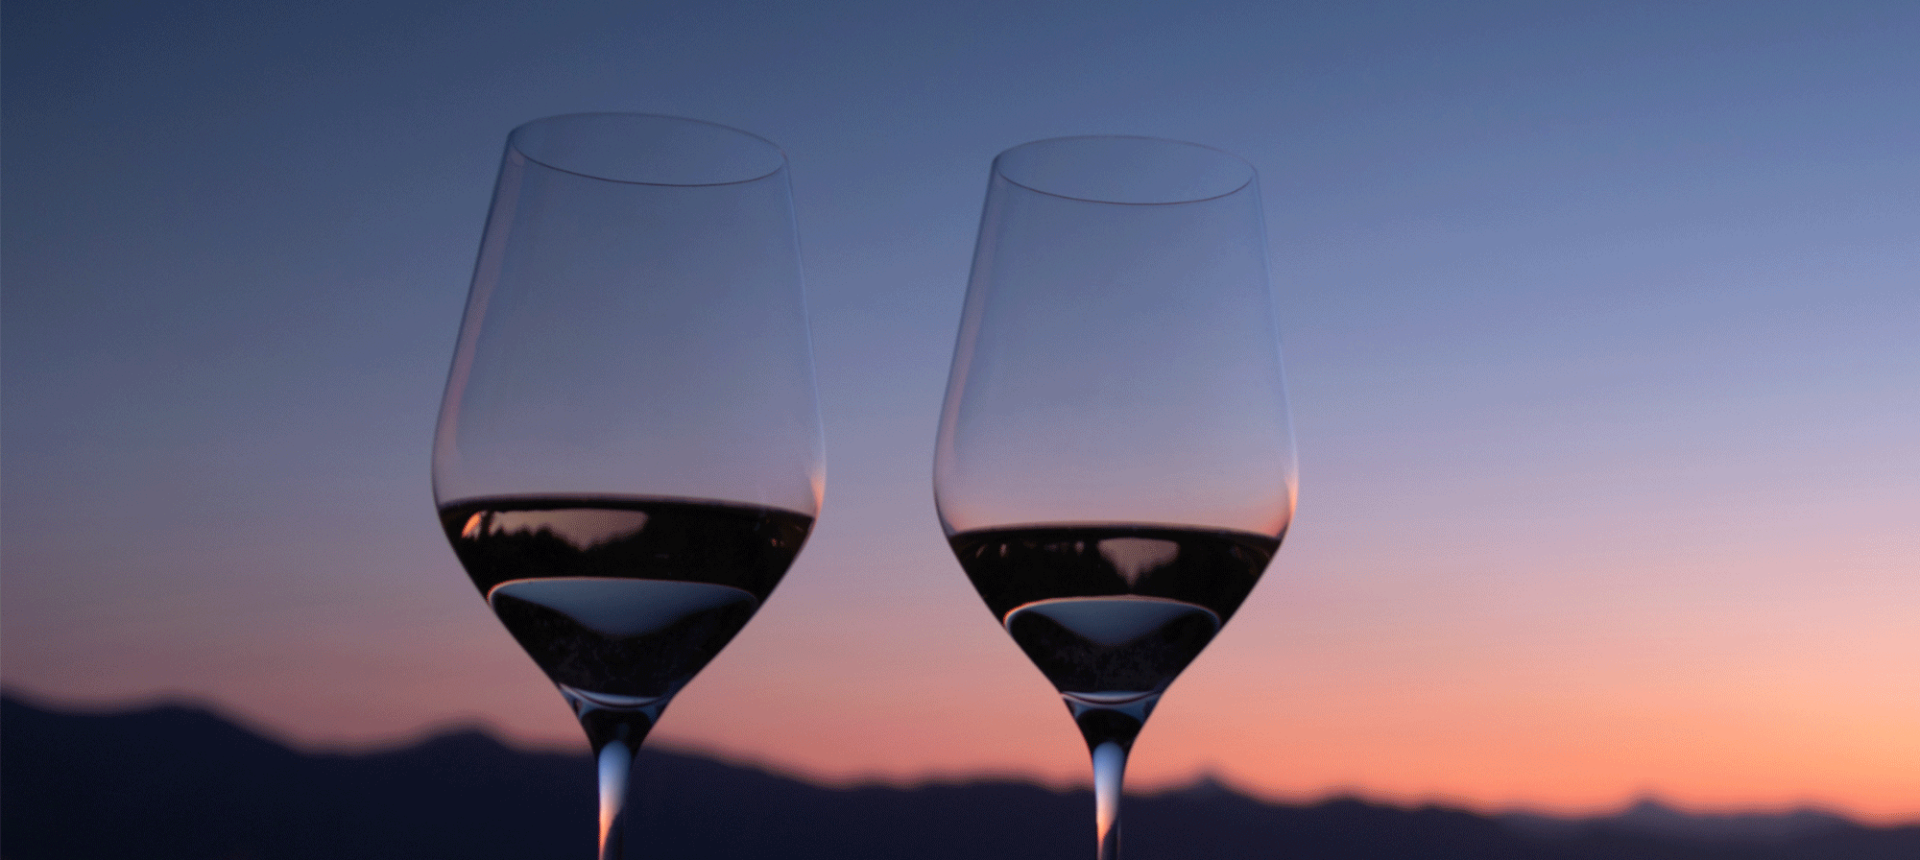 two glasses sitting on a table with the sun setting in the back ground